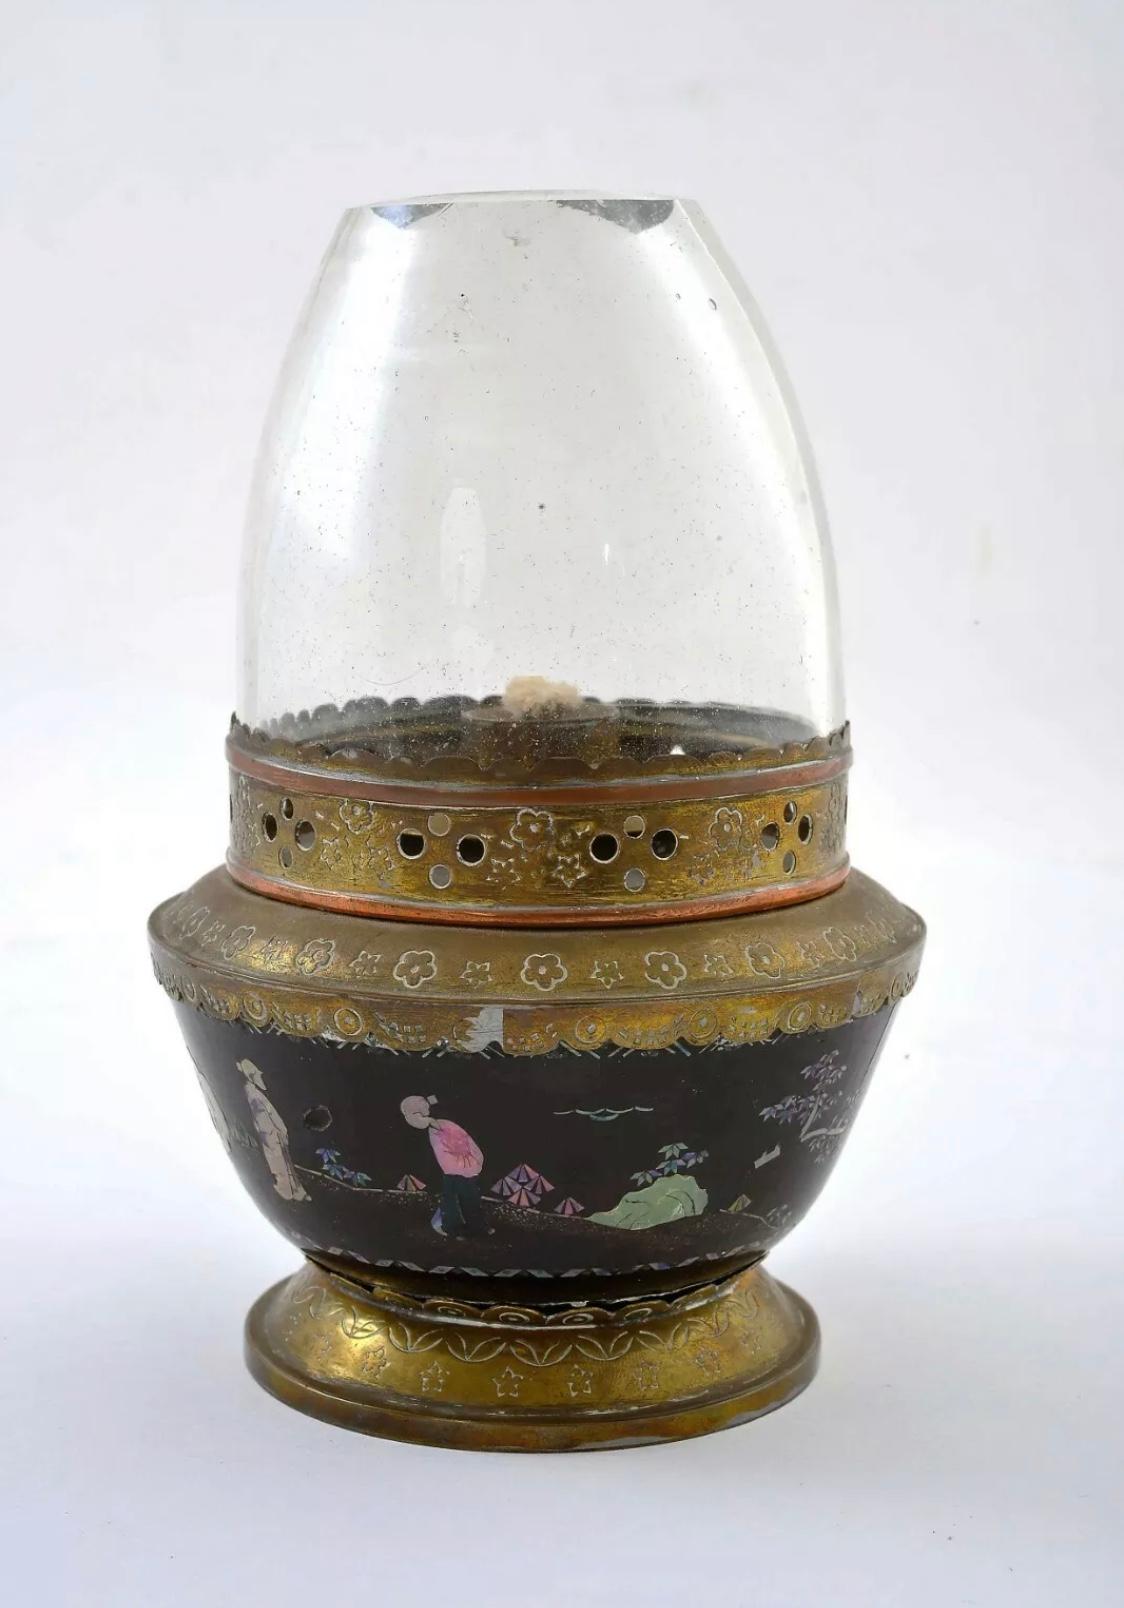 19th century Chinese mother of pearl inlay lac burgaute lacquer bowl opium lamp. Beautiful piece with detailed drawings of ancient Chinese people and repeated floral designs circling all-over.